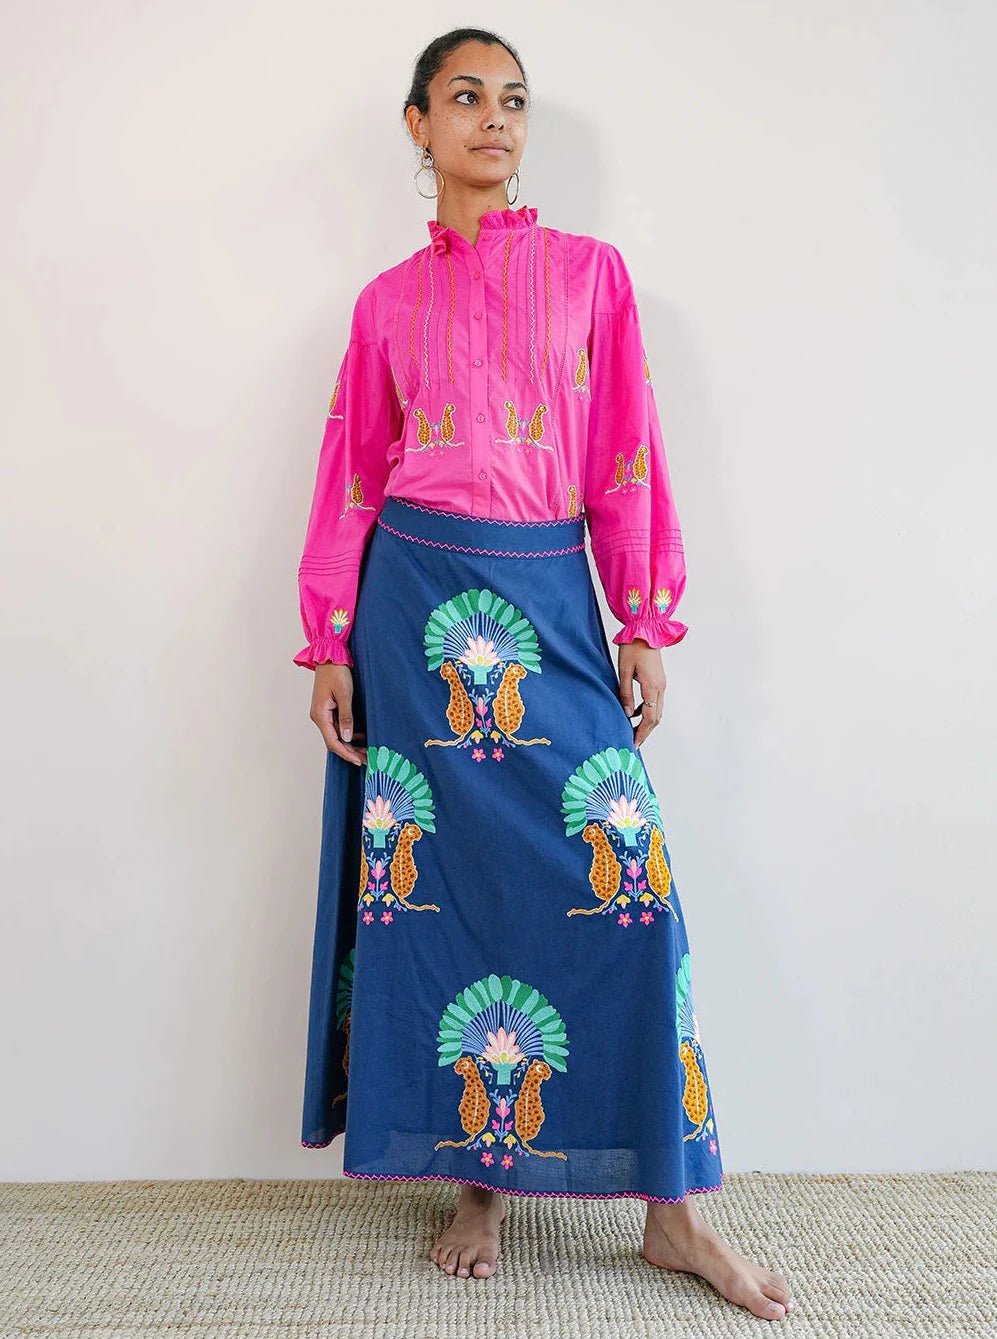 Nimo with Love Skirts Lantana Skirt in Navy / Leo Embroidery